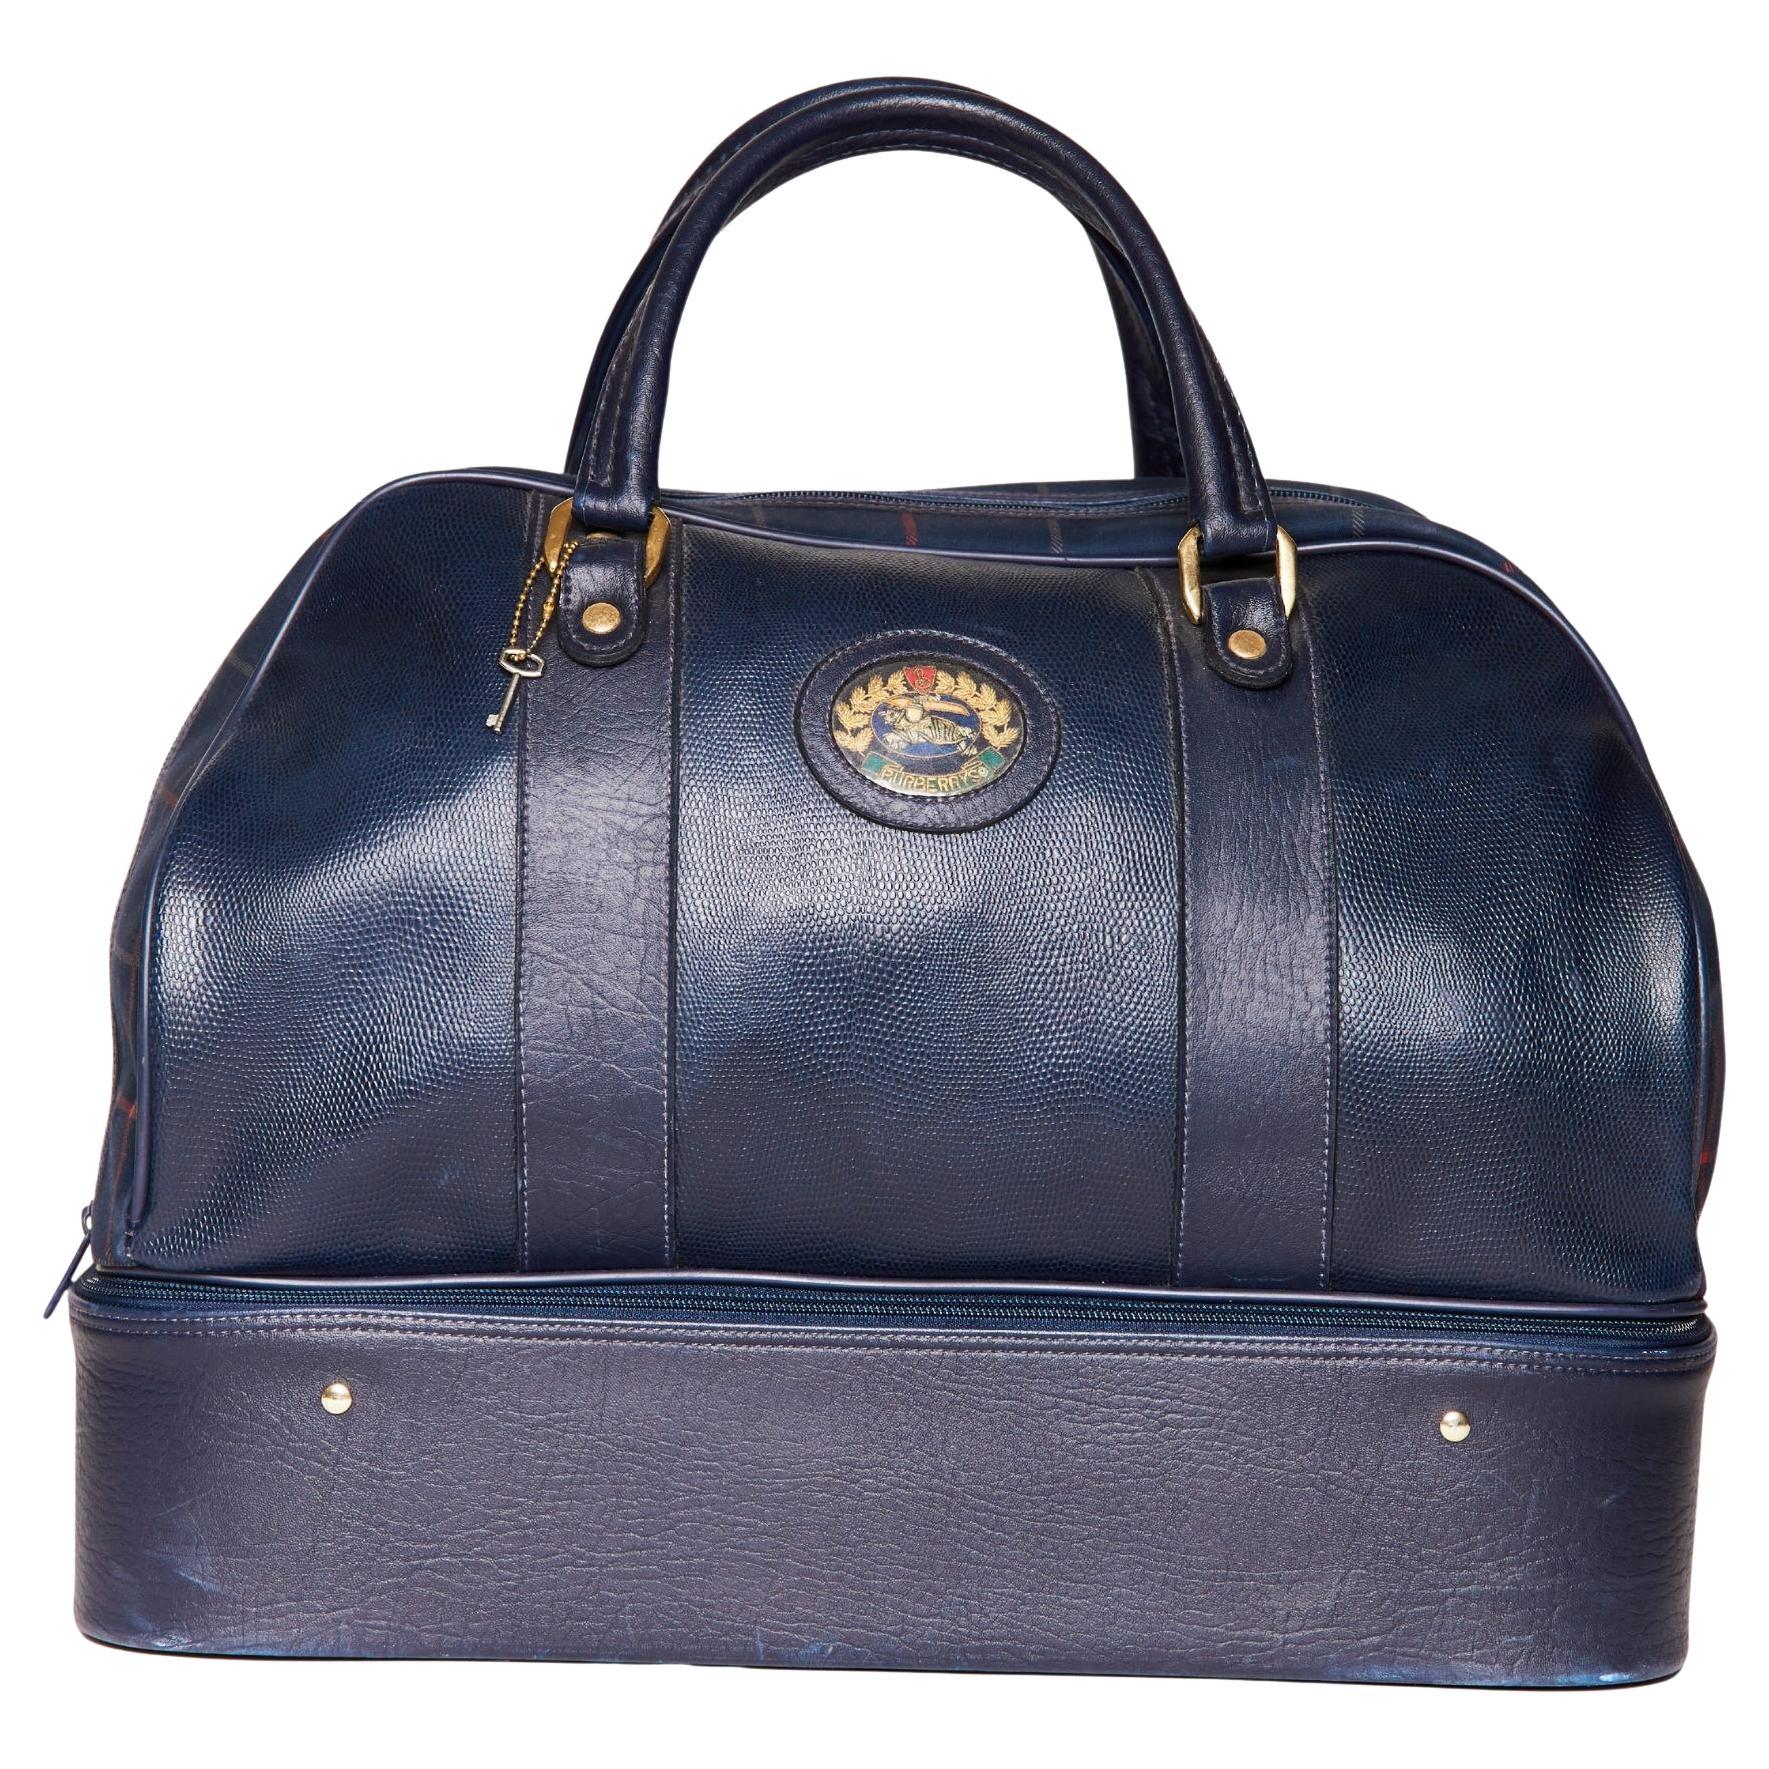 Burberry Navy Leather & Plaid Canvas Top Handle Travel Bag